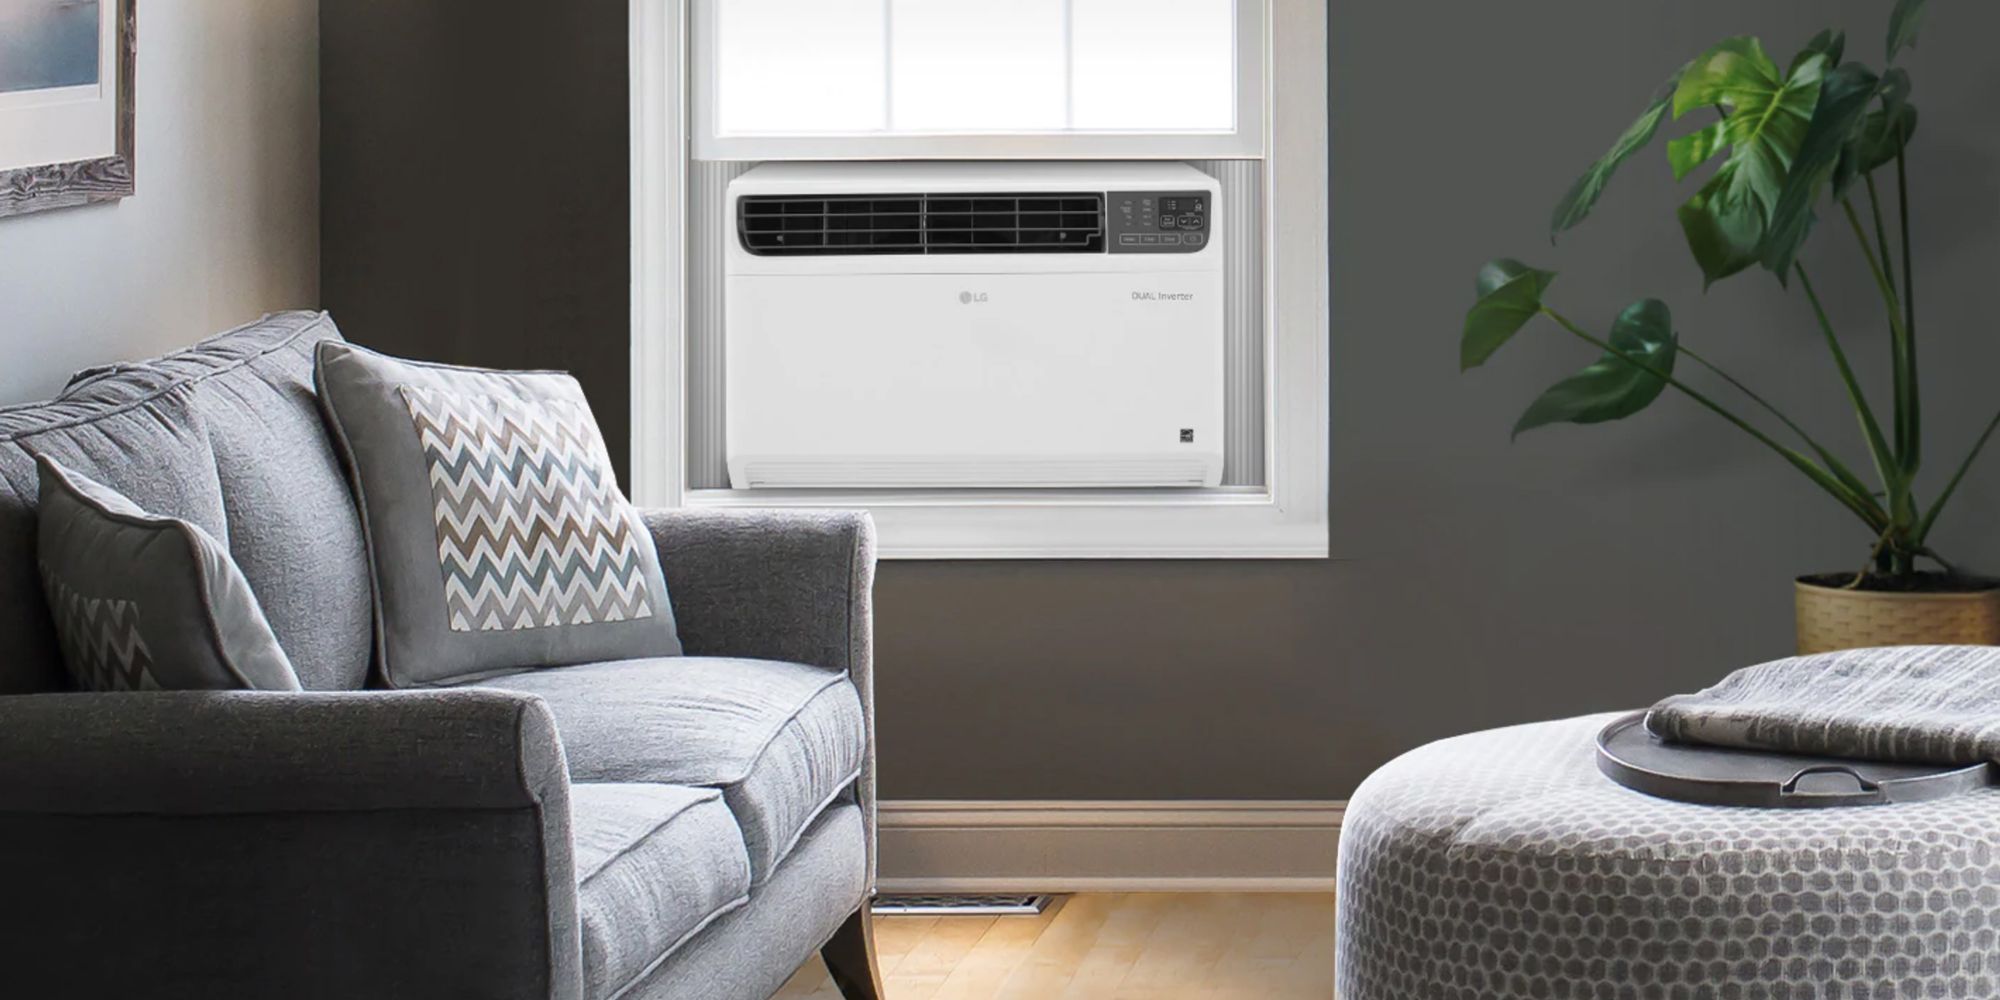 LG wi-fi air conditioner in living room window